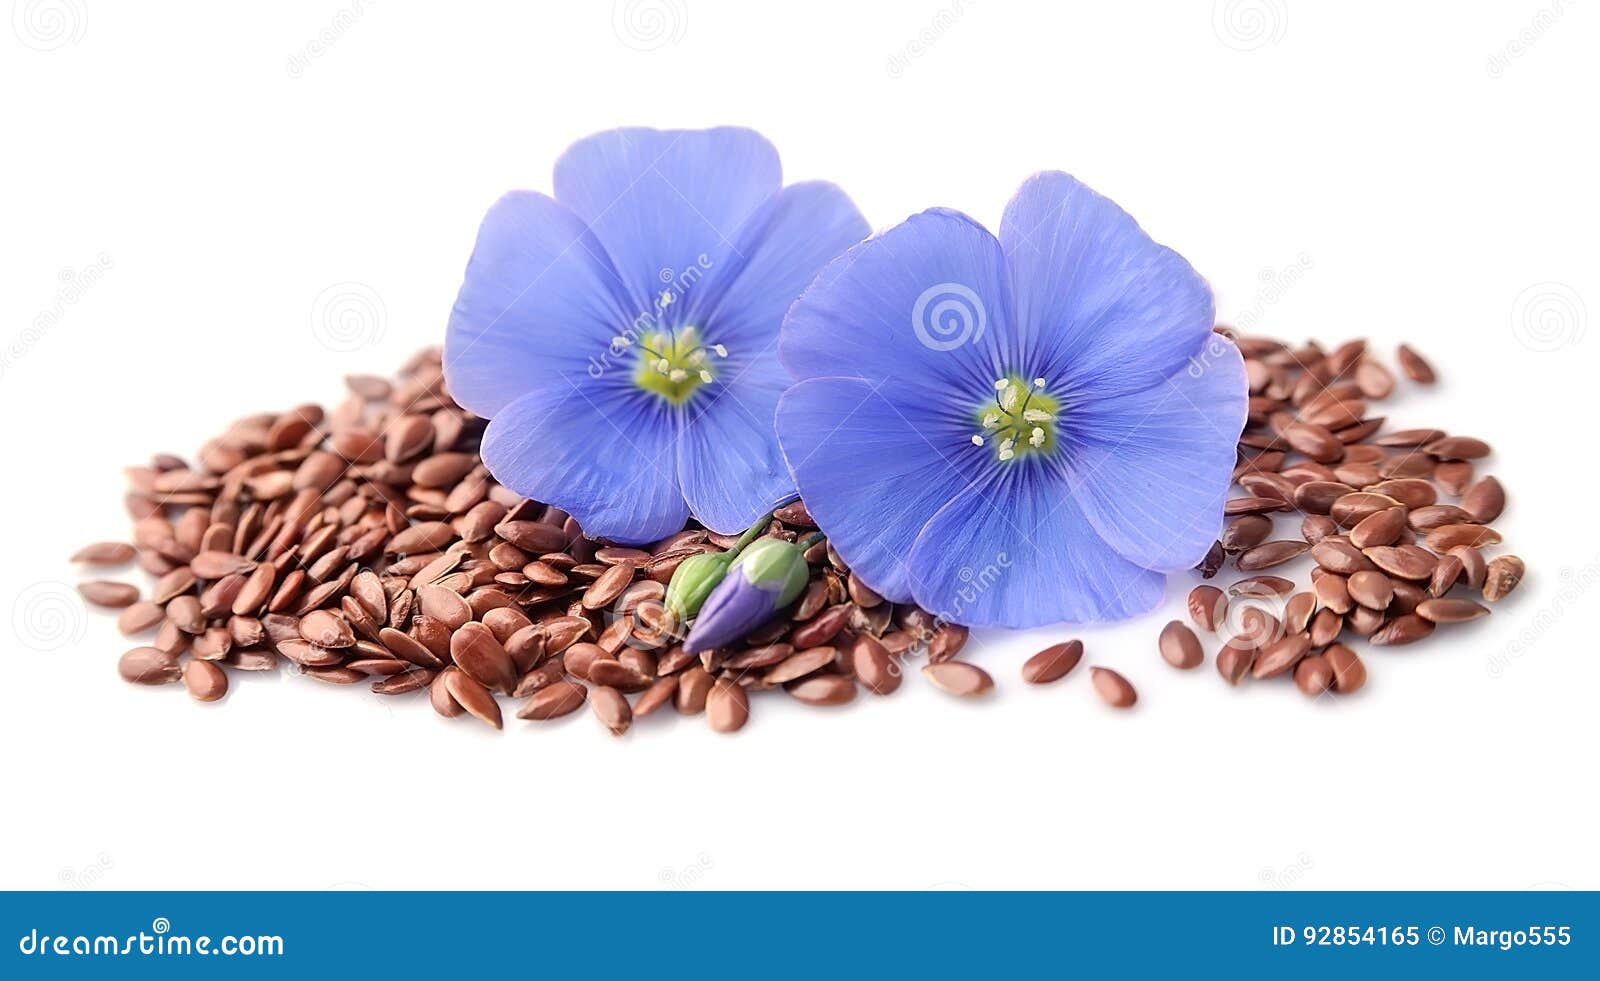 flax seed and flax flowers .